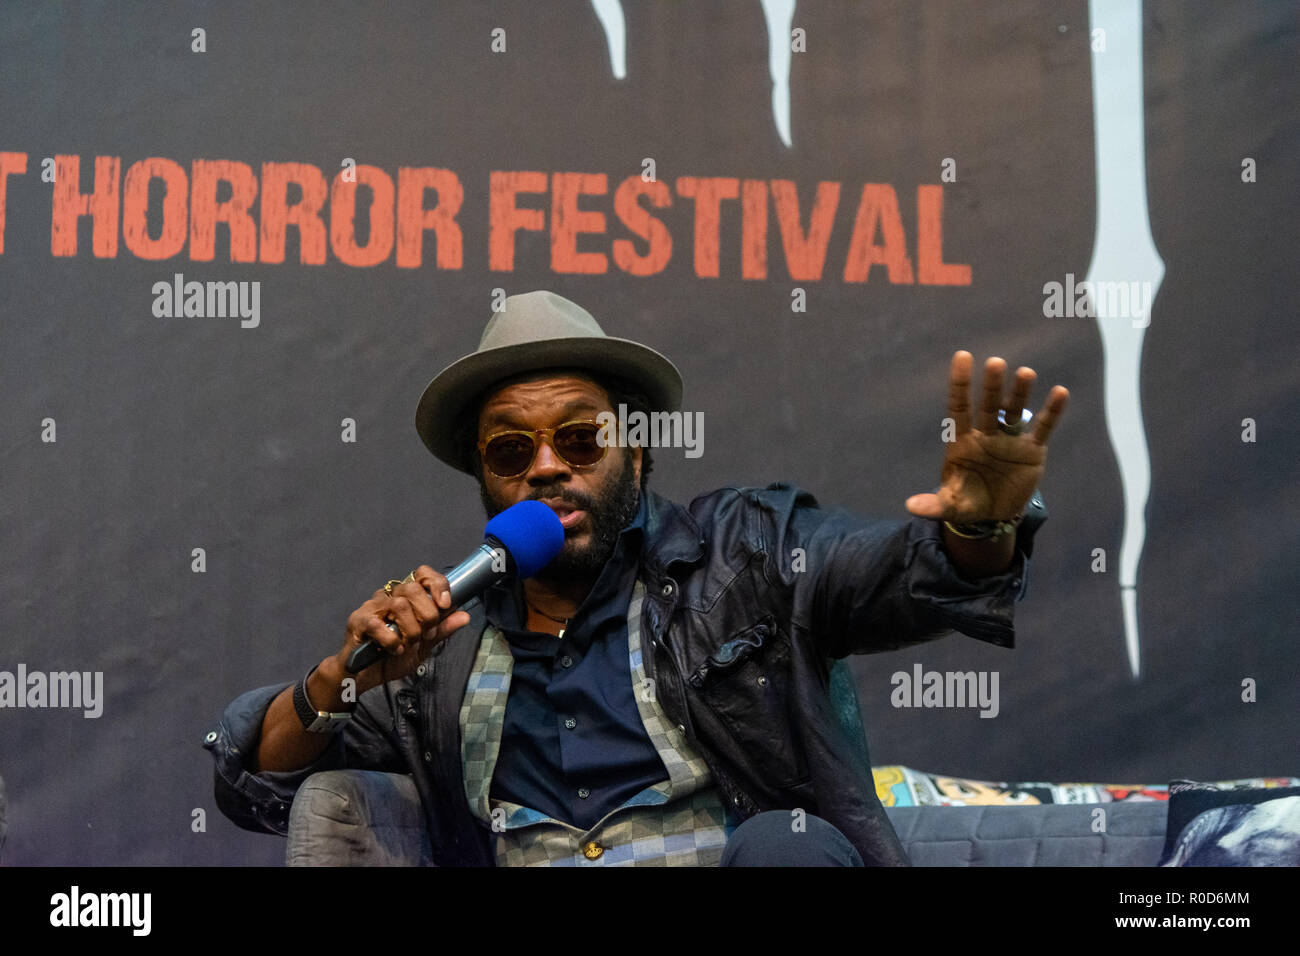 Dortmund, Germany. 3rd November, 2018. Chad L. Coleman (*1974, American actor, The Walking Dead, Arrow, The Wire, The Orville) at Weekend of Hell 2018 Credit: Markus Wissmann/Alamy Live News Stock Photo